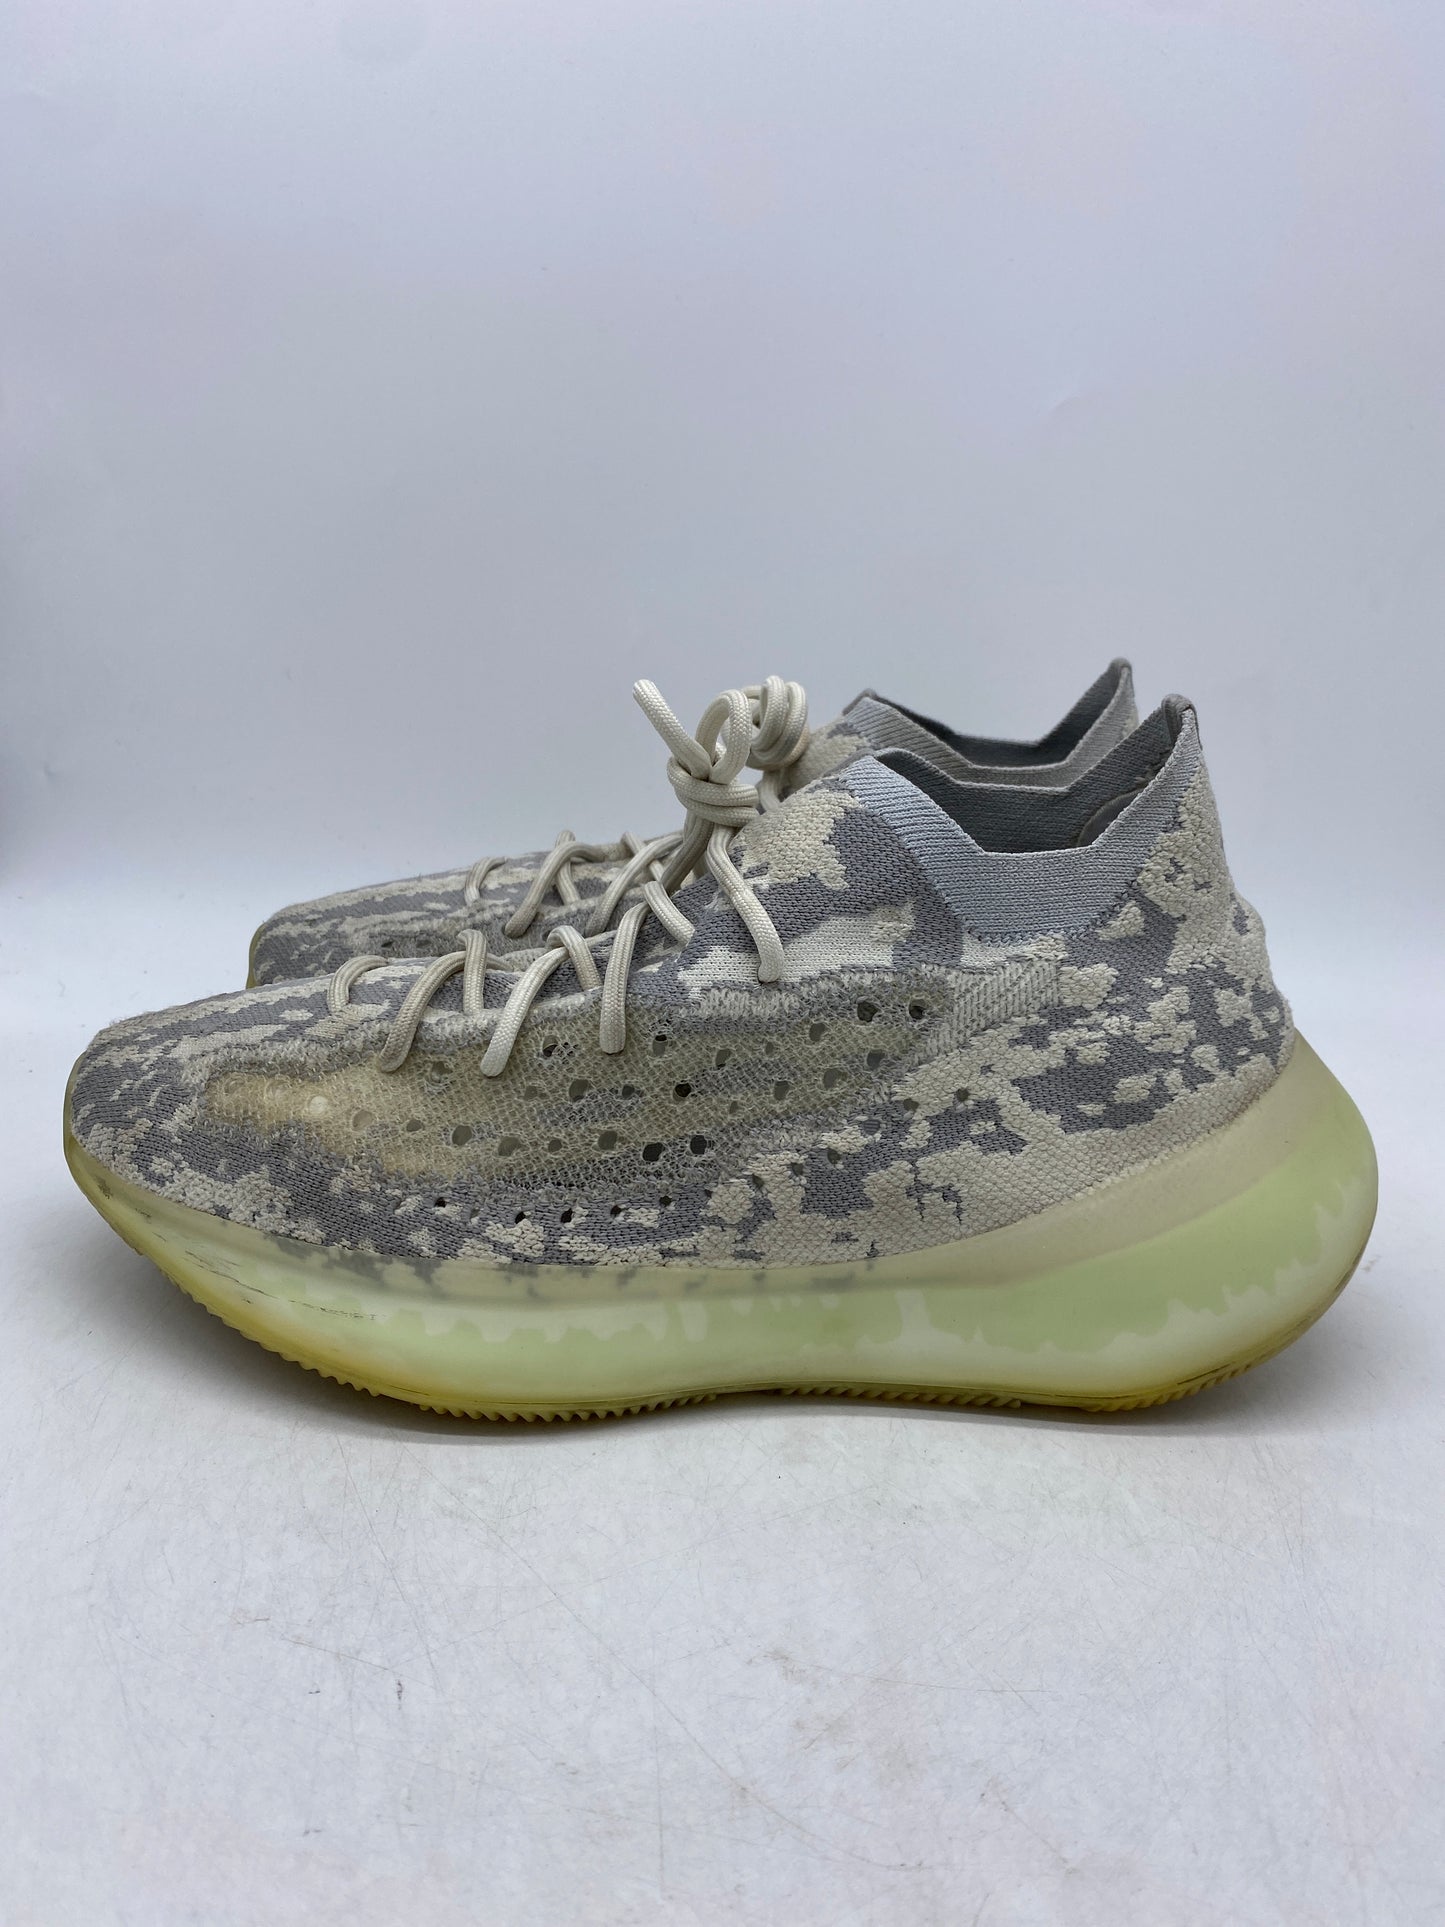 Load image into Gallery viewer, Preowned Yeezy 380 Alien Sz 11.5M/13W FV3260
